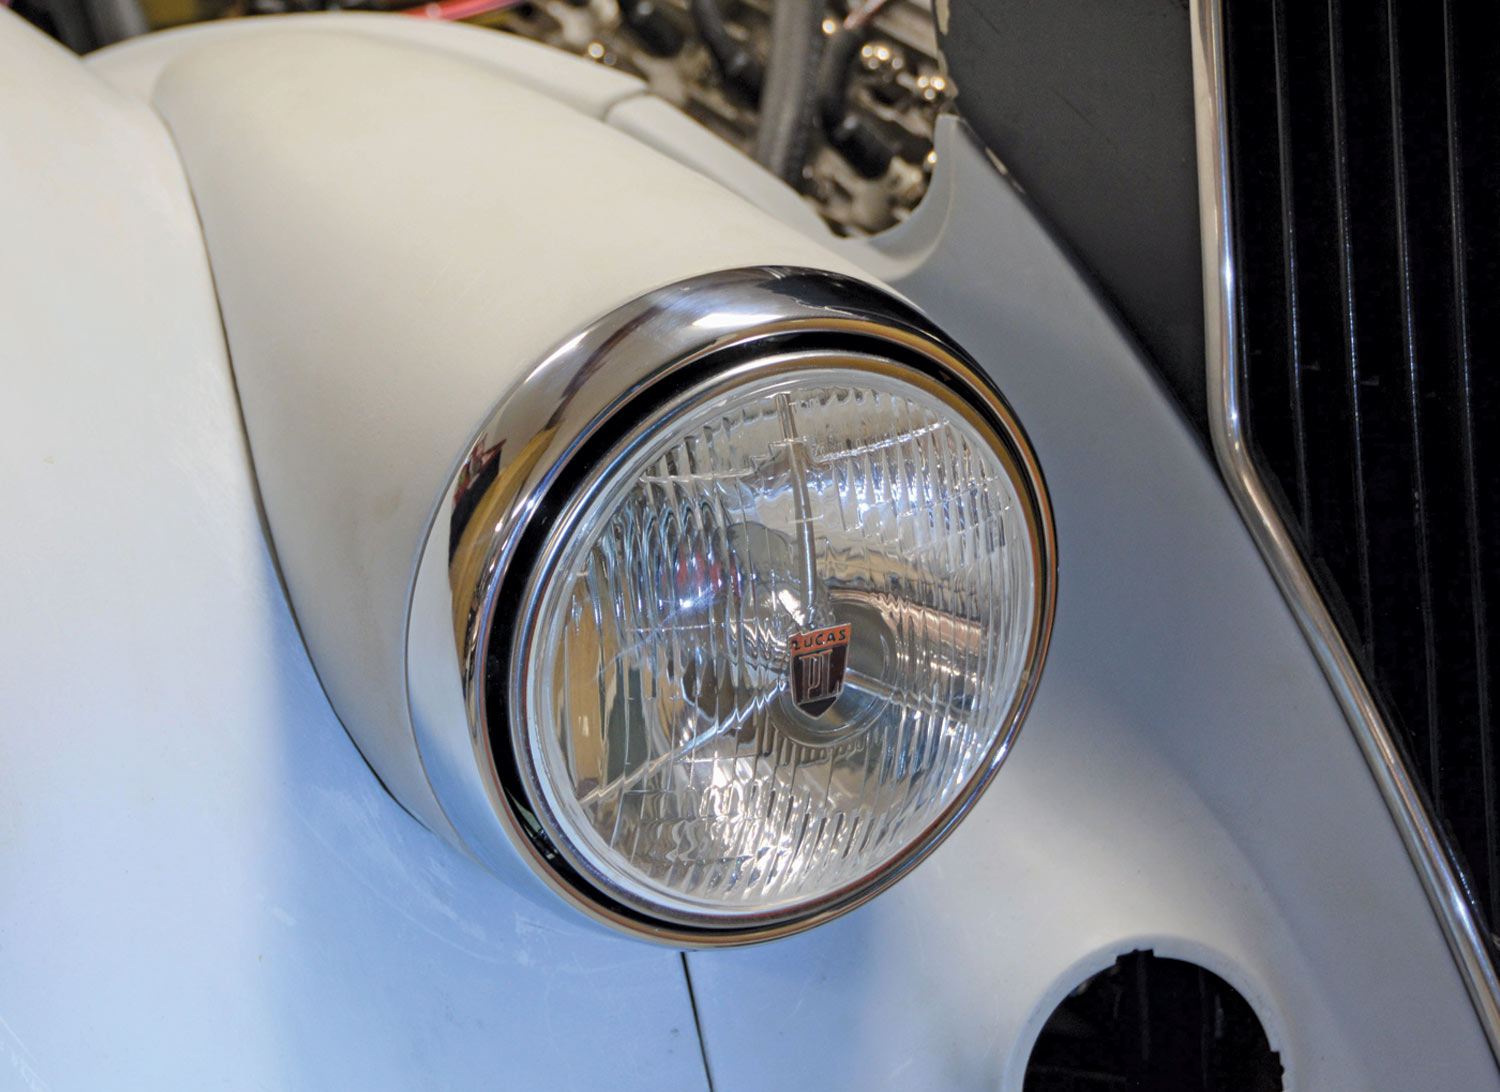 view of the finished Lucas PL halogen lights rotated properly in the ’41 Chevy headlights